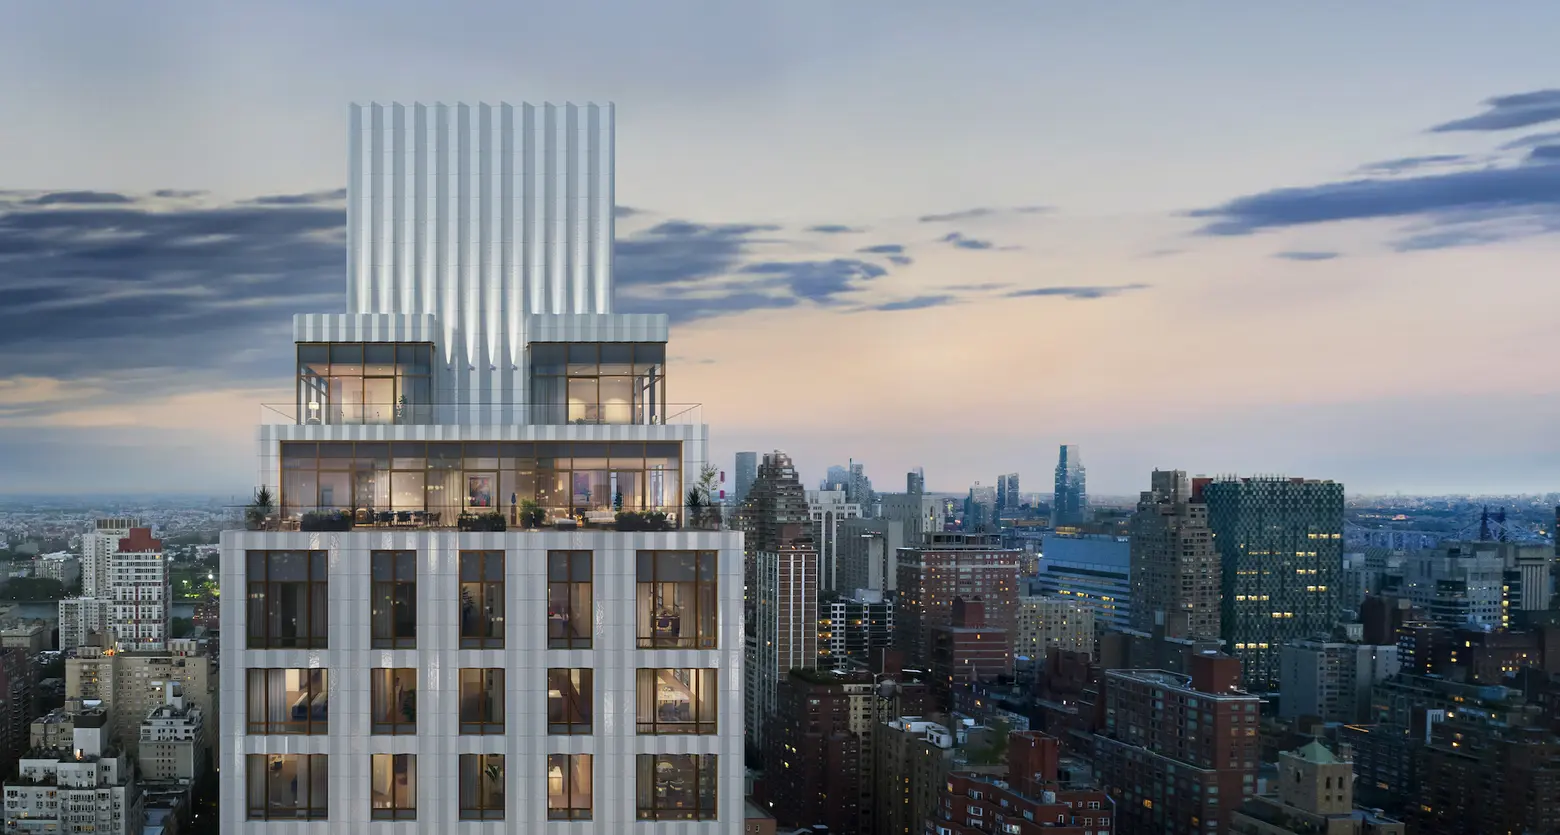 New images and details unveiled for 420-foot-tall Upper East Side condo